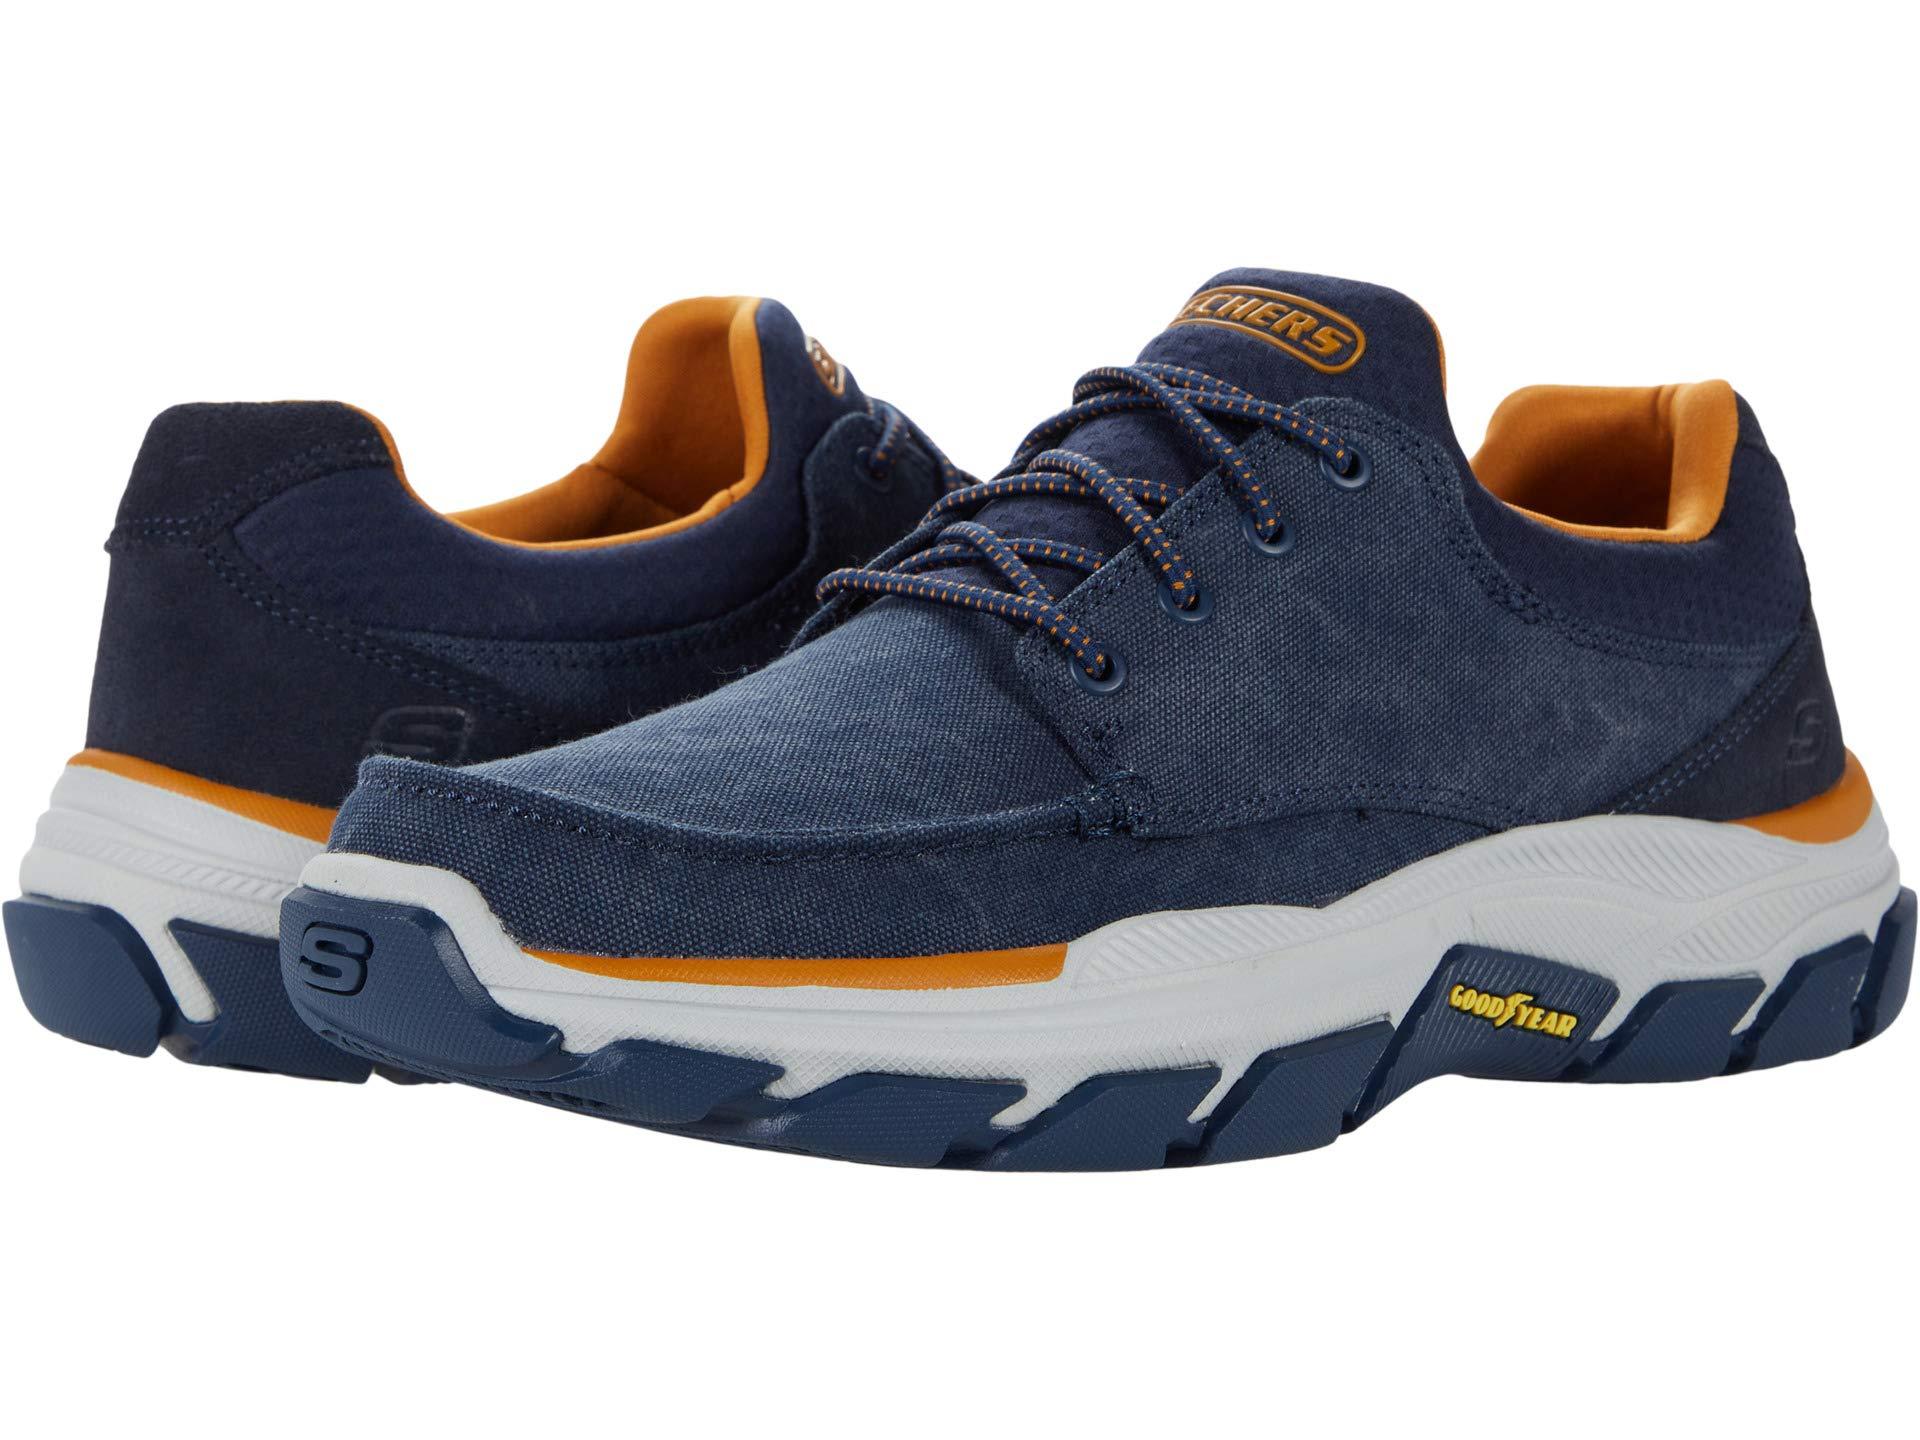 Skechers Canvas Relaxed Fit Respected - Loleto in Navy (Blue) for Men - Lyst